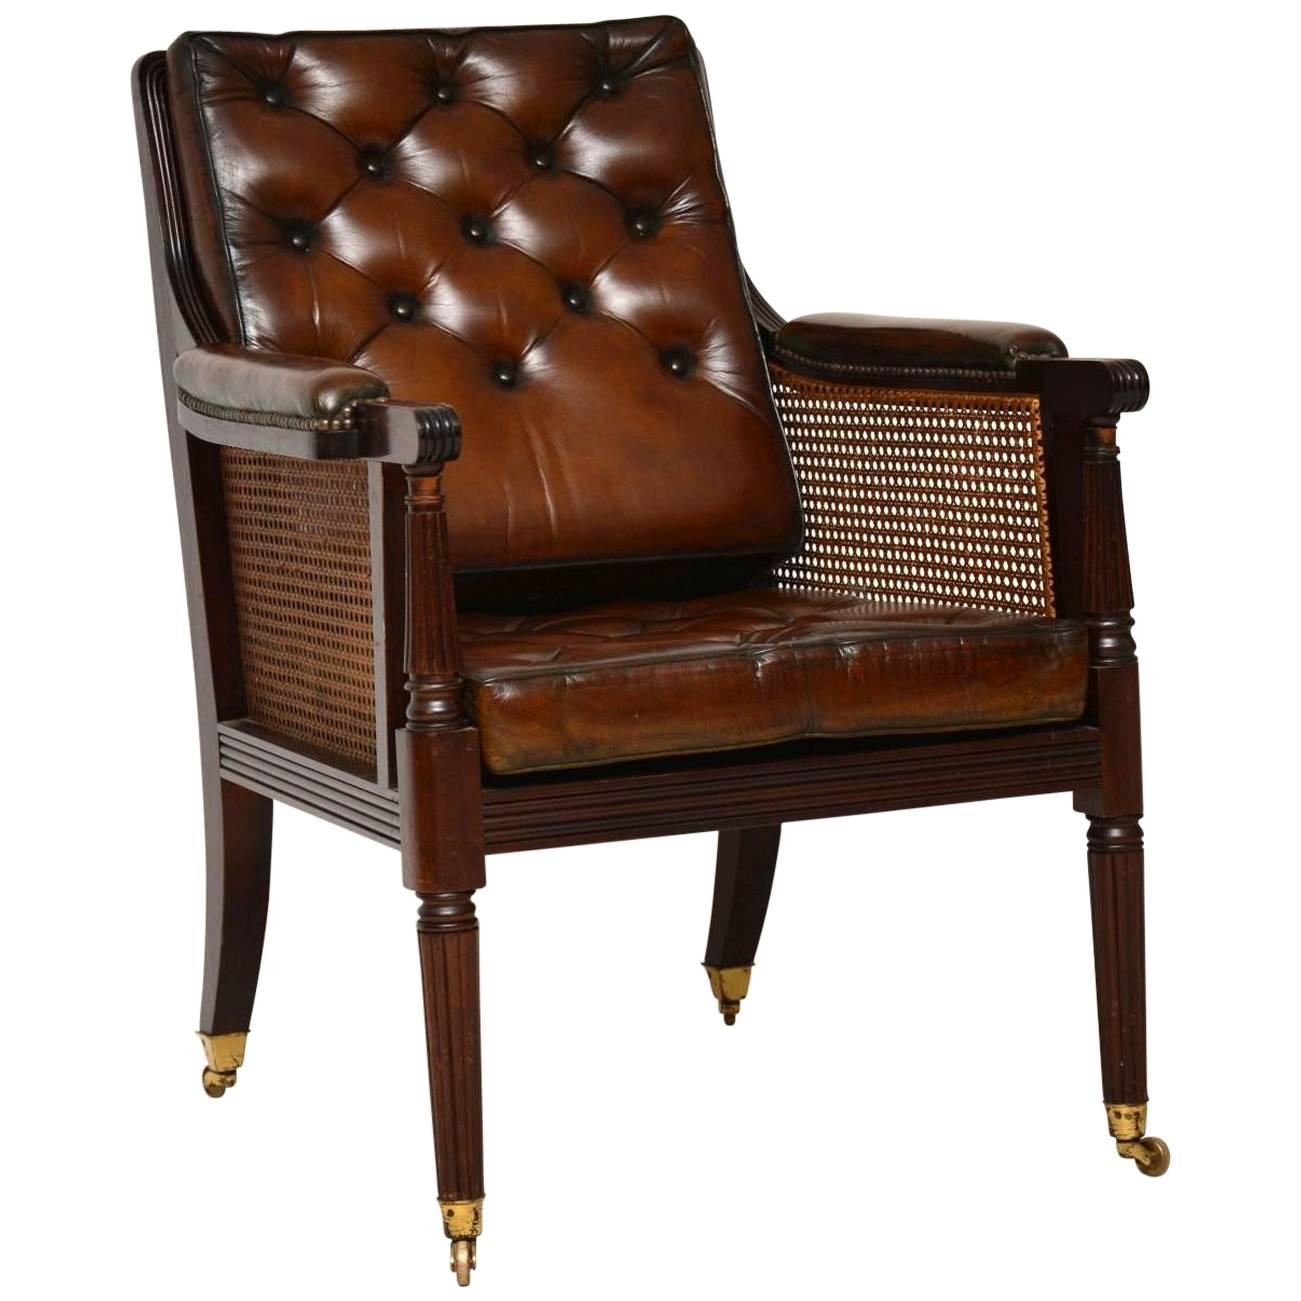 Antique Leather and Caned Mahogany Armchair